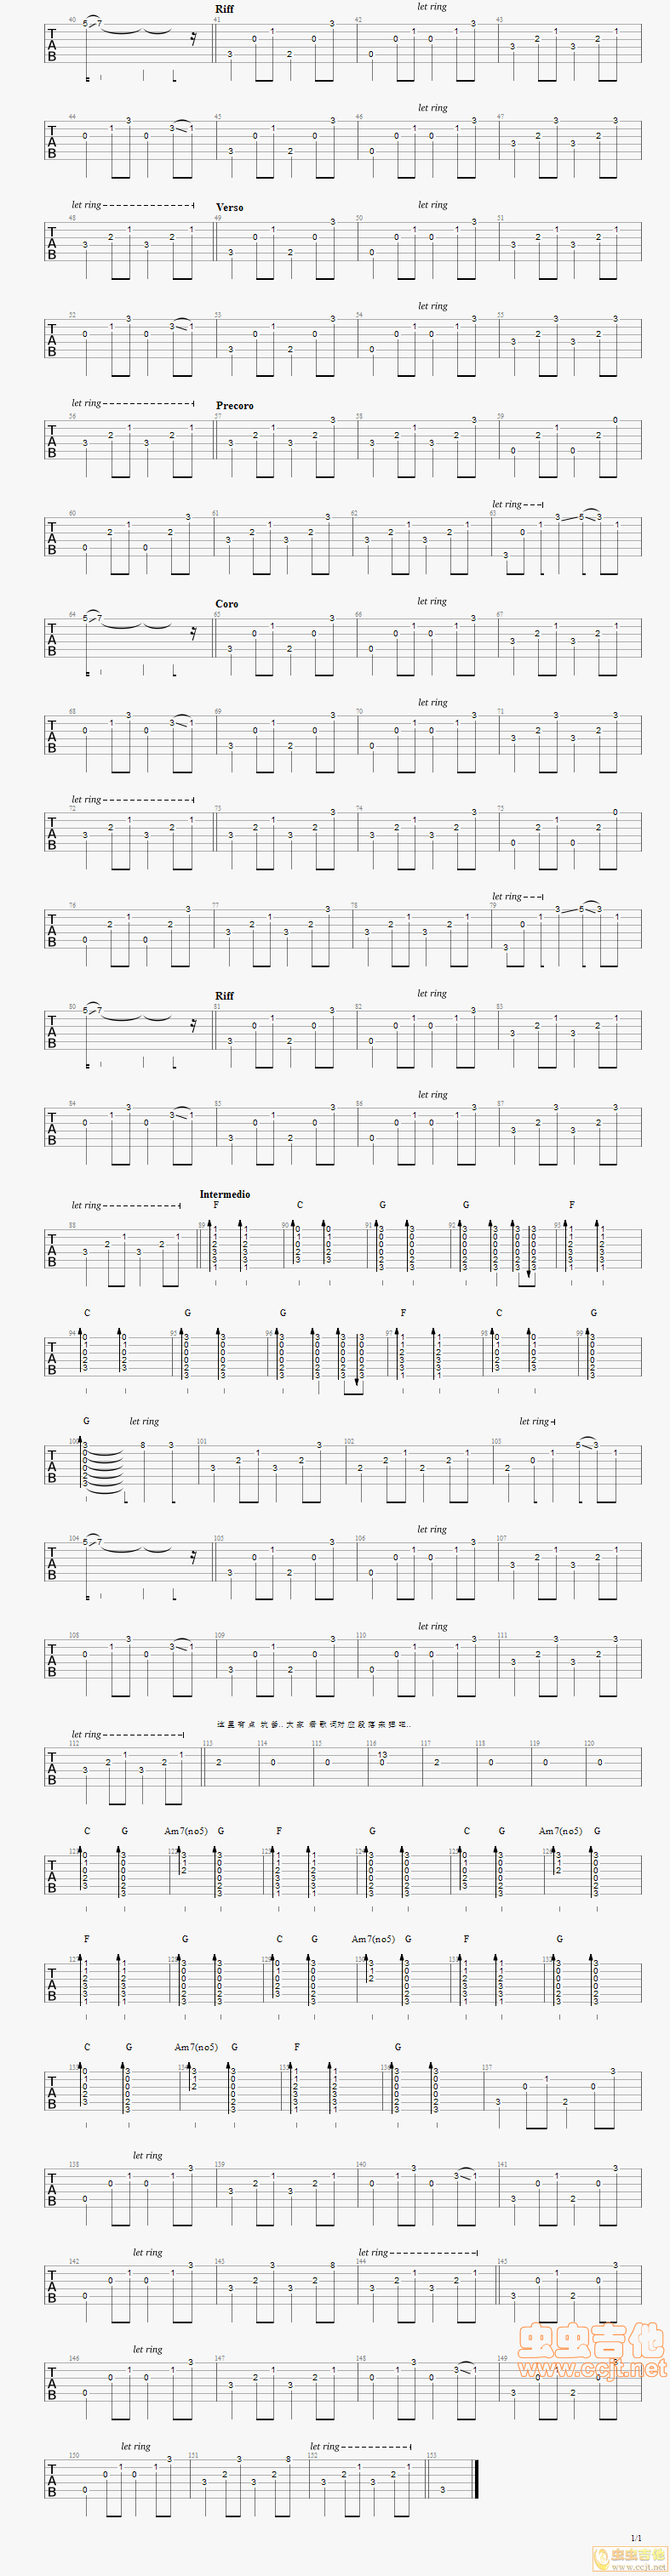 Never Grow Up by Taylor Swift - SOLO Guitar Tabs Chords Notes Sheet Music Free